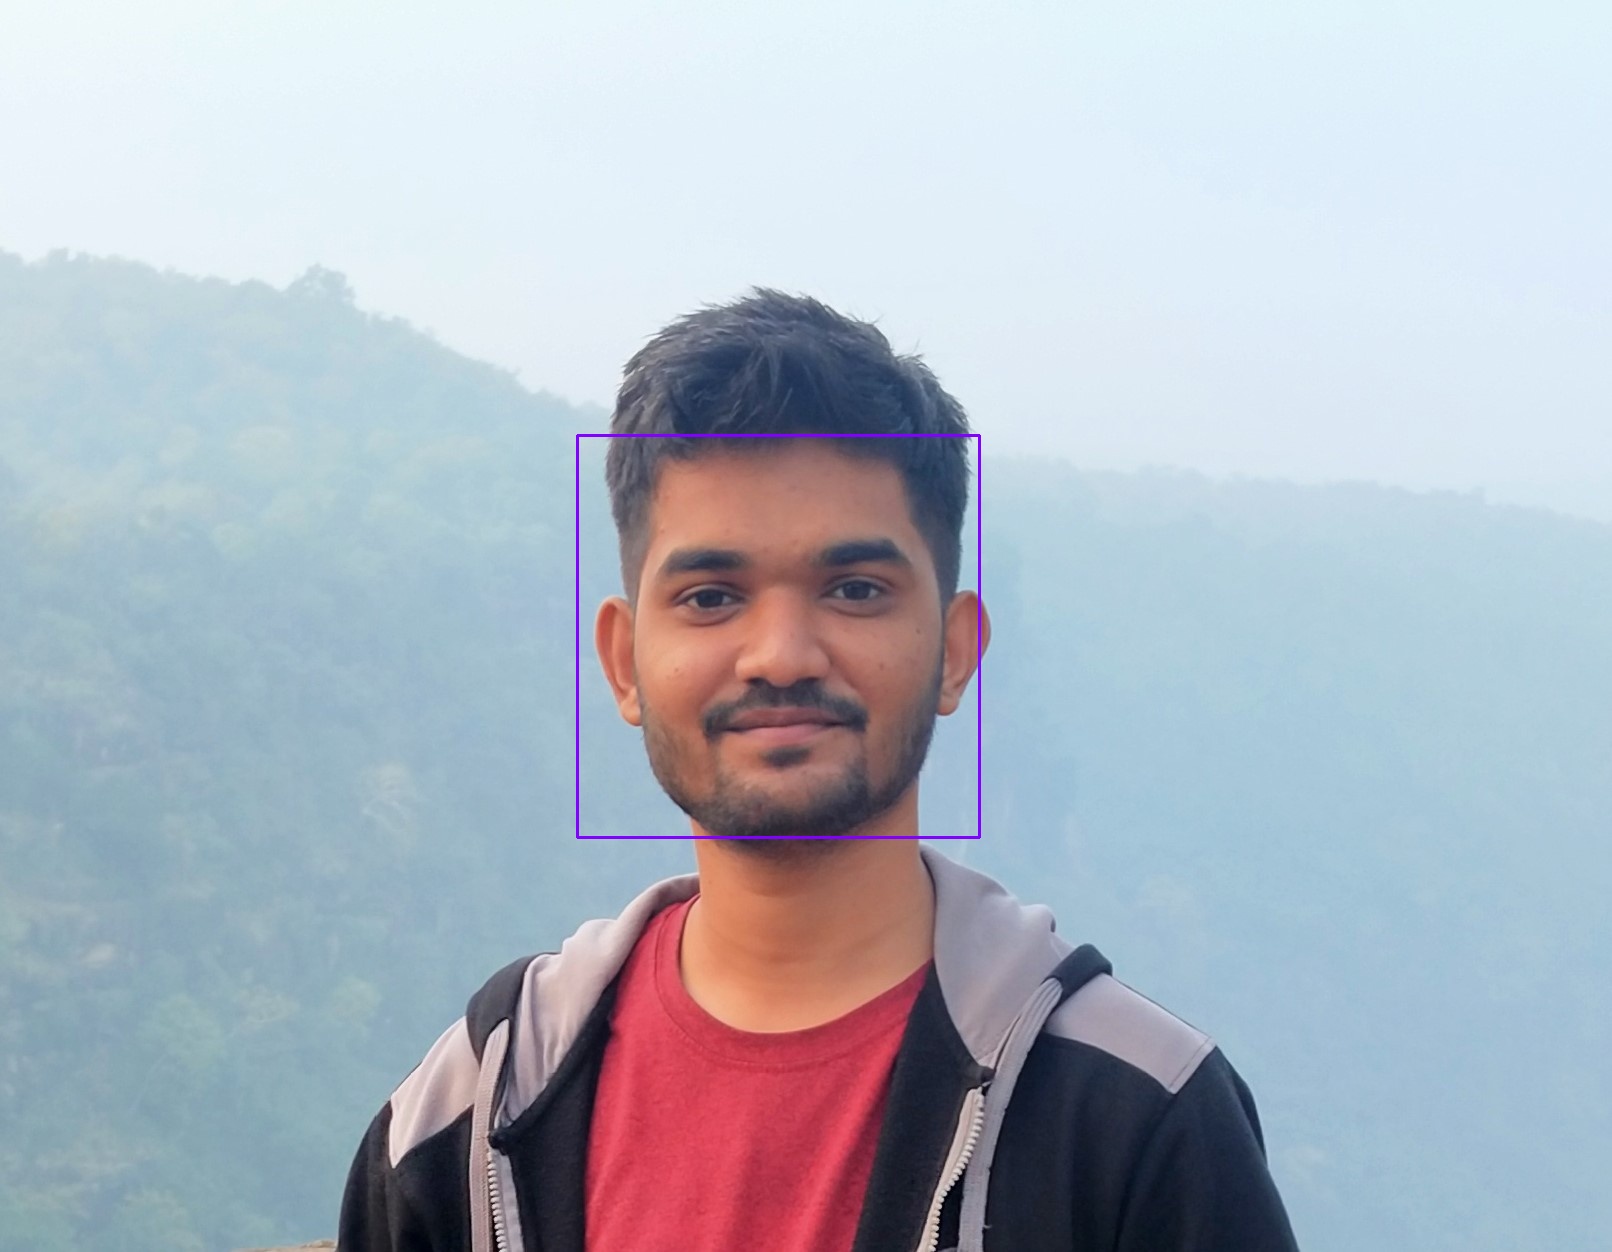 Face Detection Using Opencv With Haar Cascade Classifiers